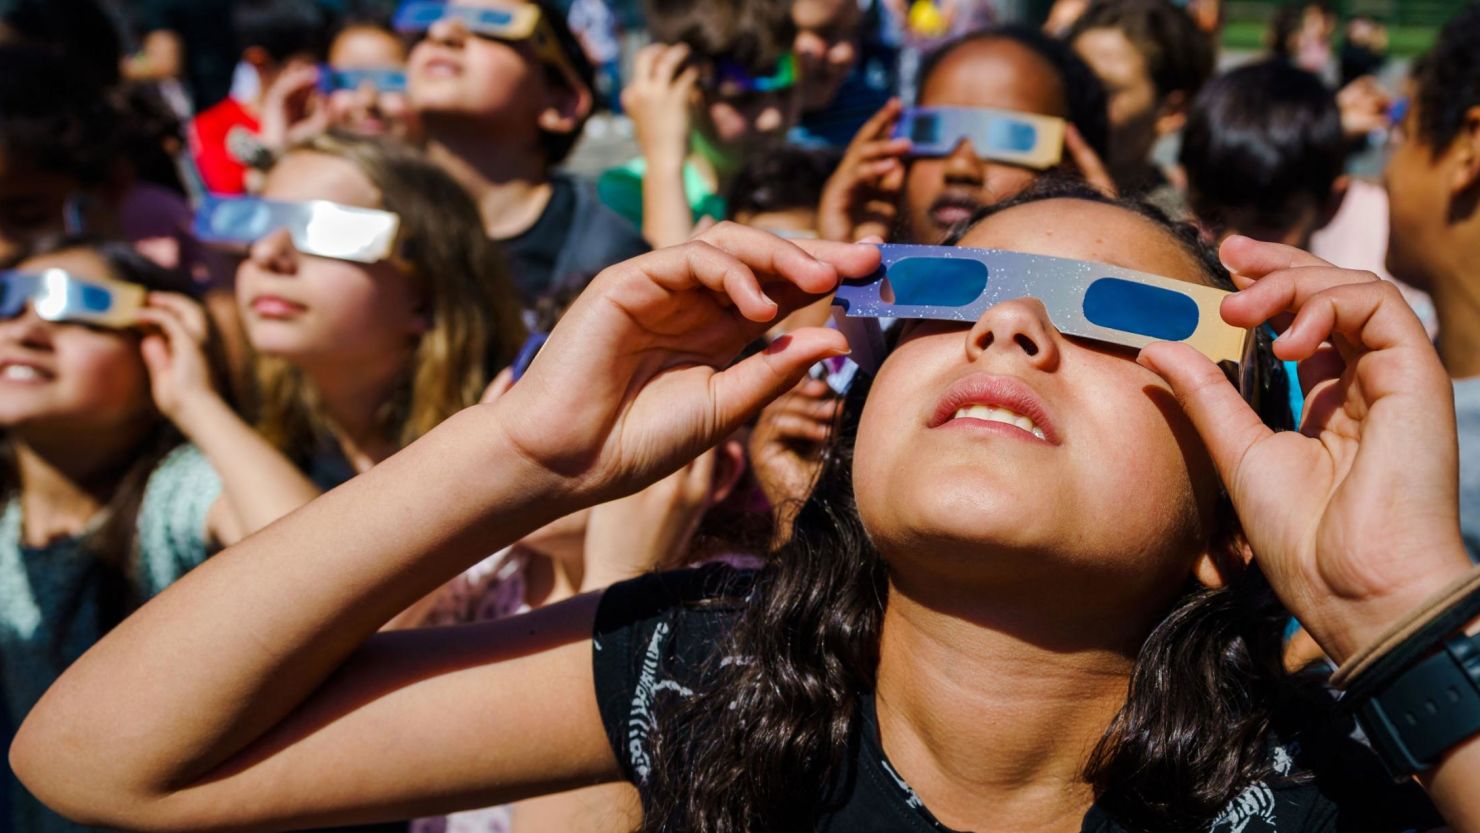 Students, wearing protective glasses, look at the partial solar eclipse in Schiedam in the Netherlands on June 10, 2021.